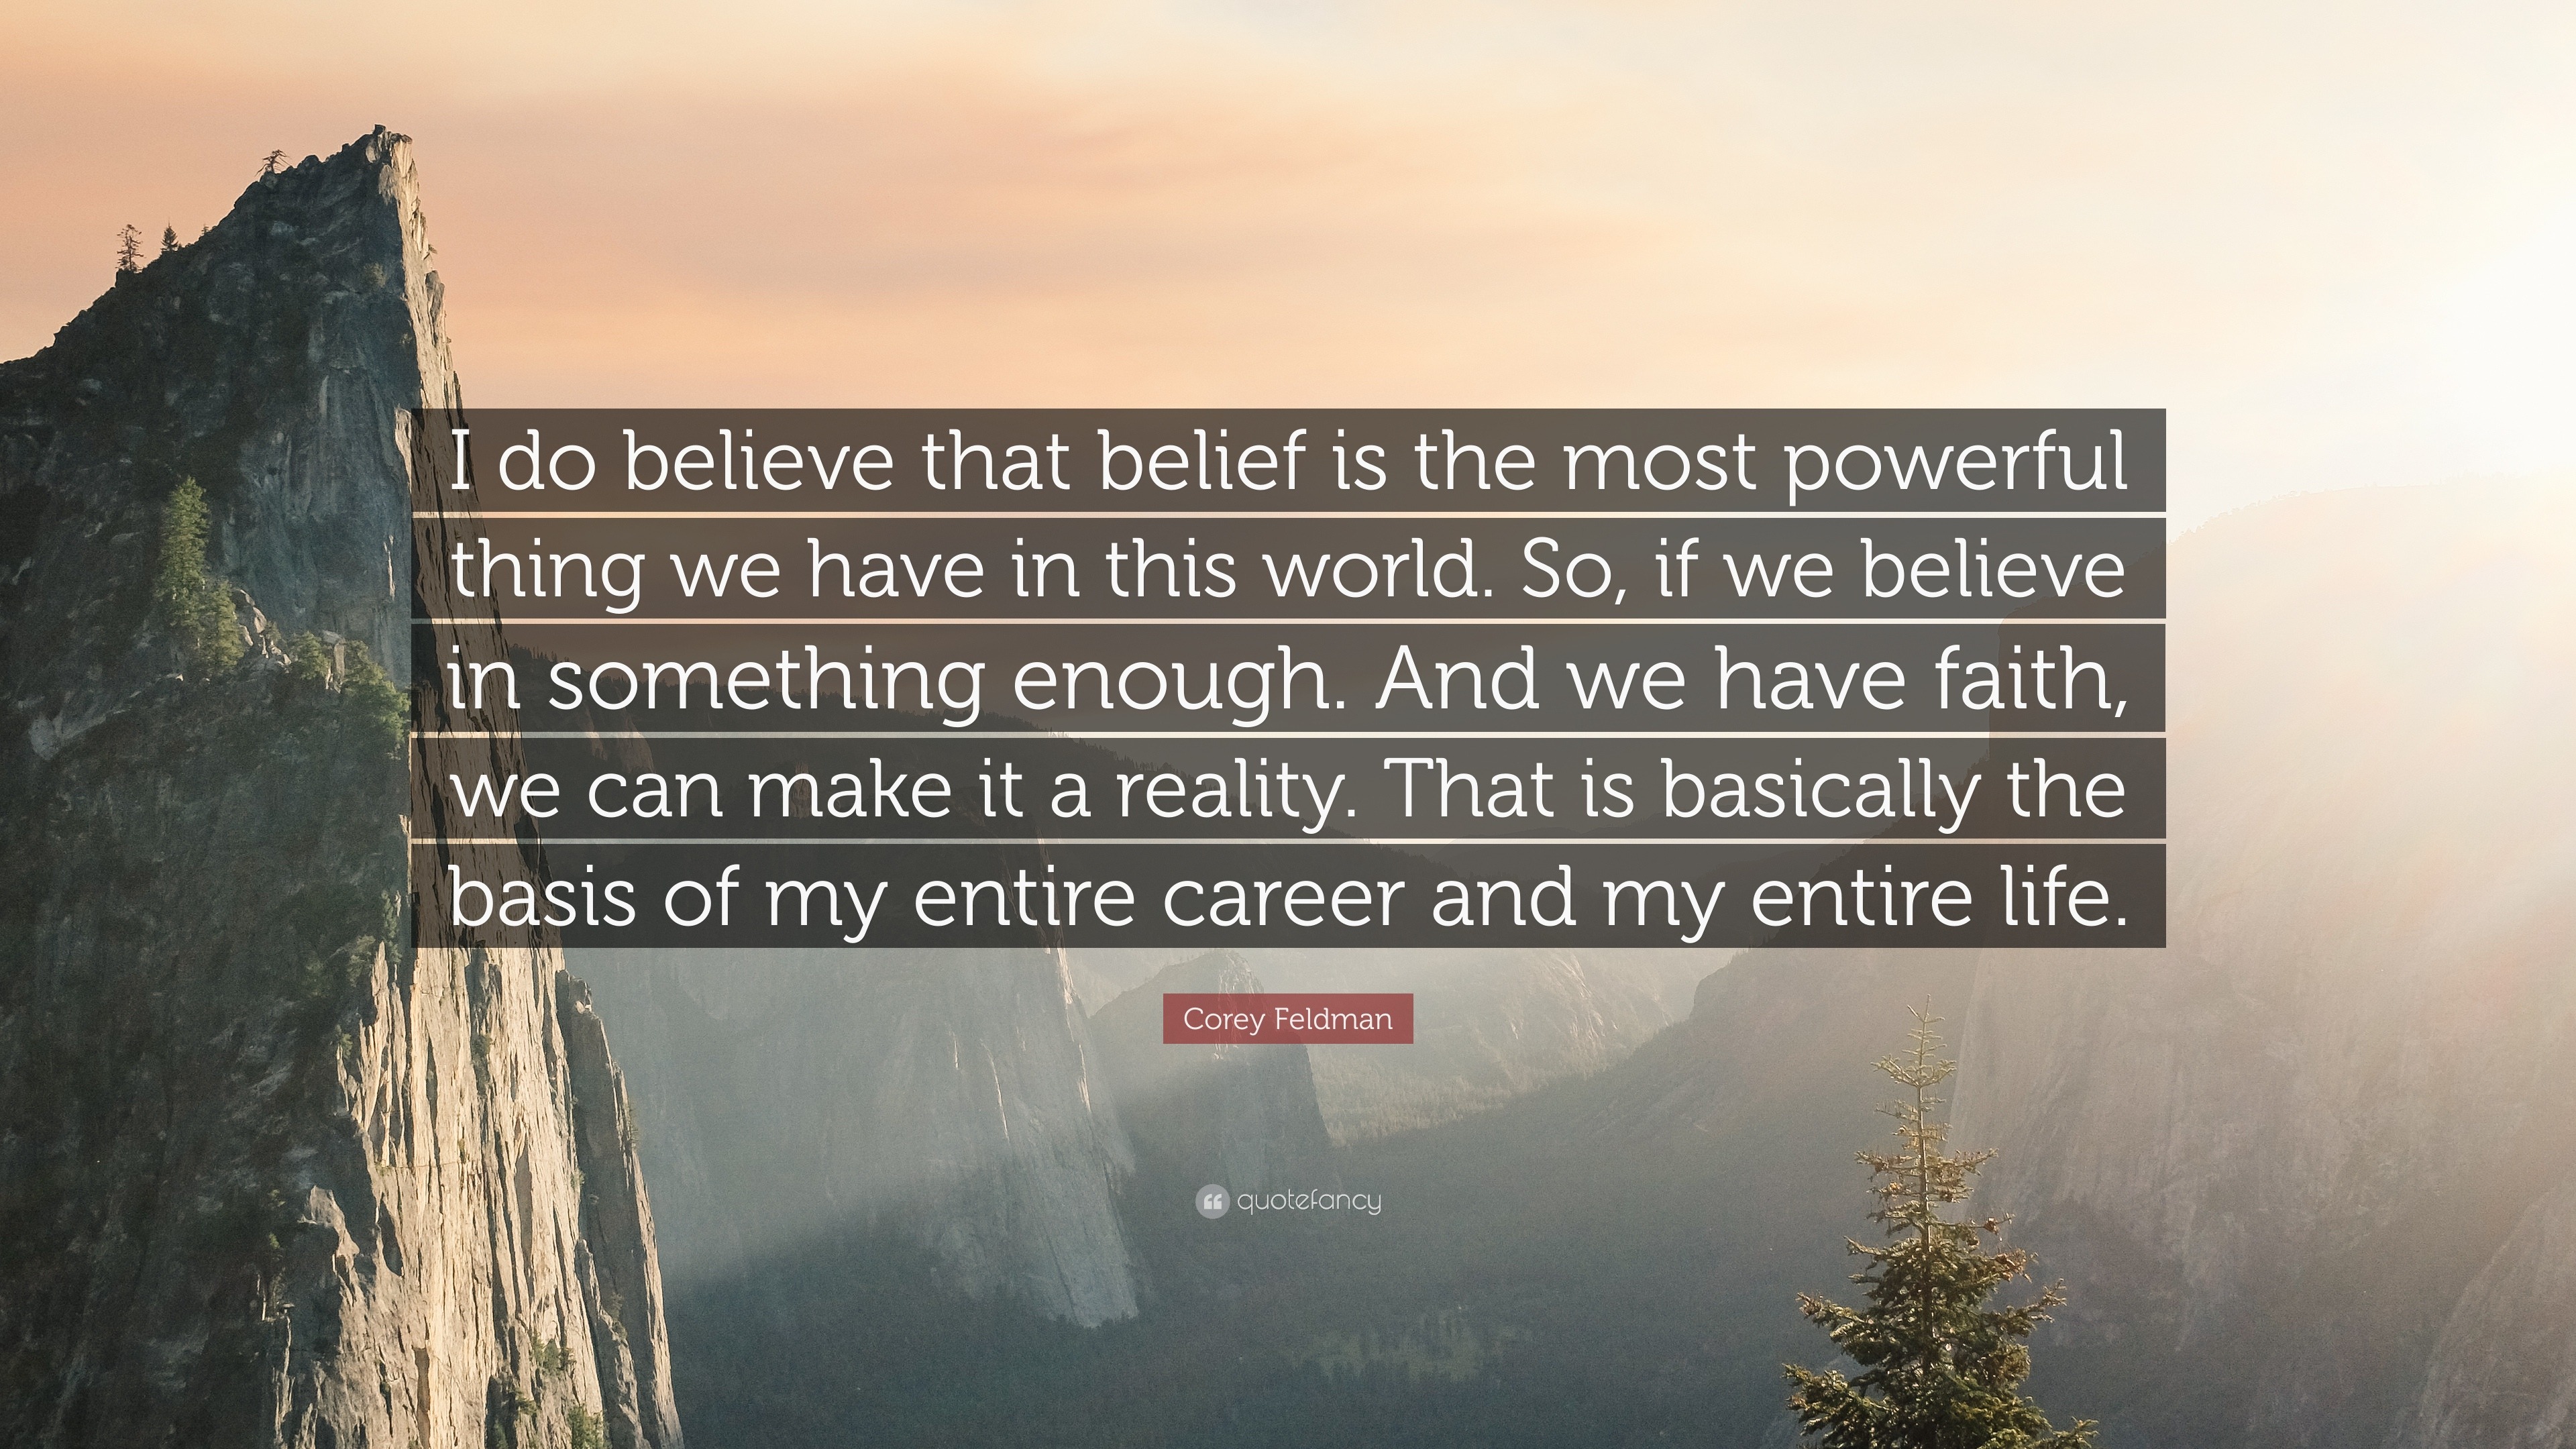 Corey Feldman Quote: “I do believe that belief is the most powerful thing  we have in this world. So, if we believe in something enough. And we”